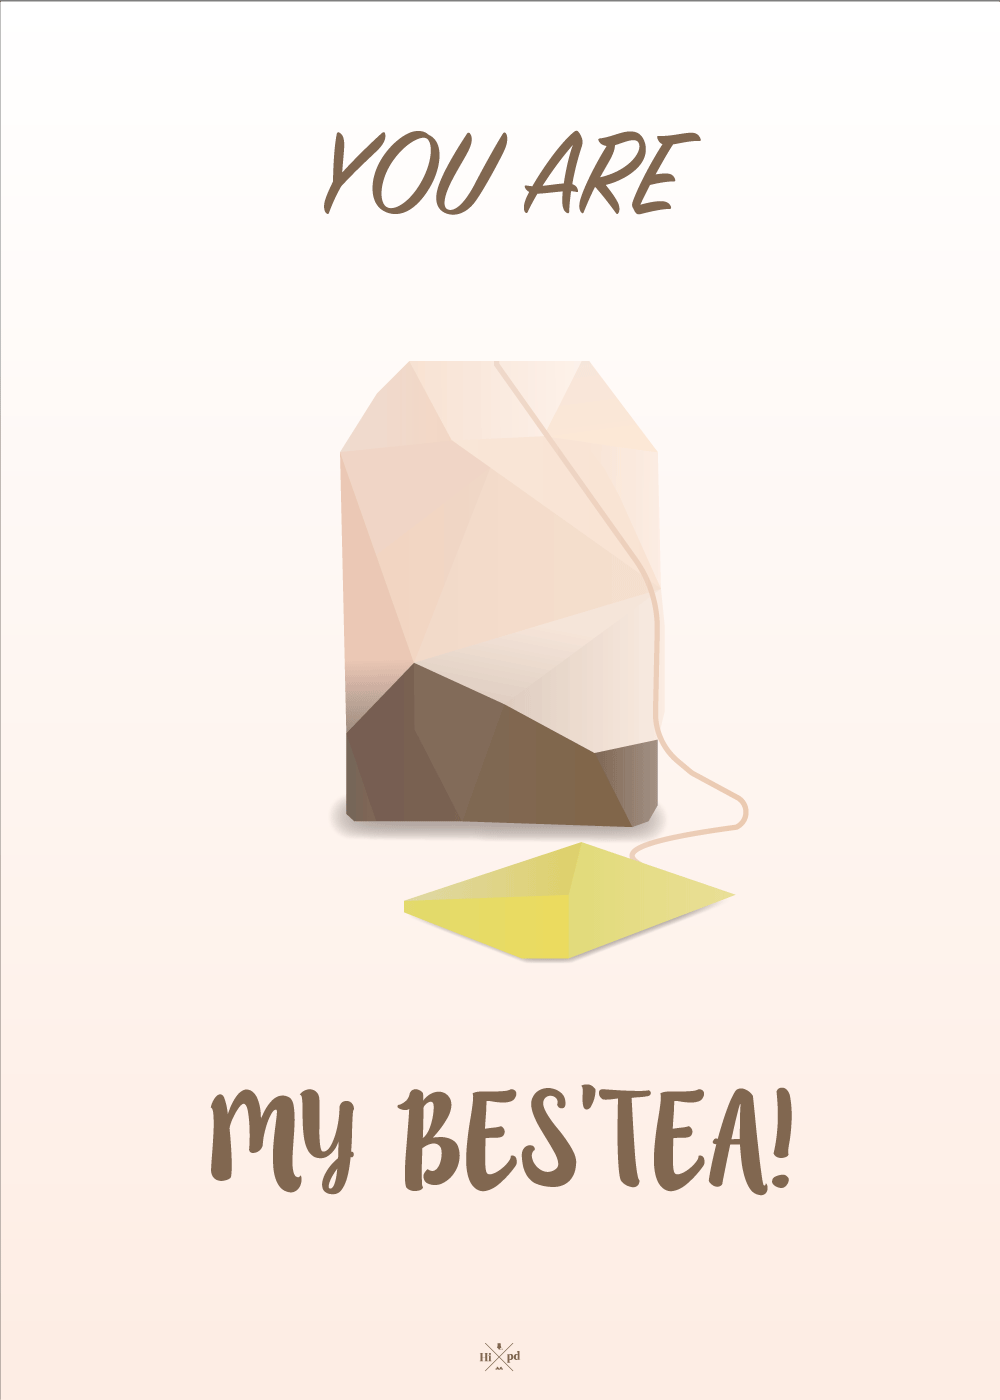 You are my bestea